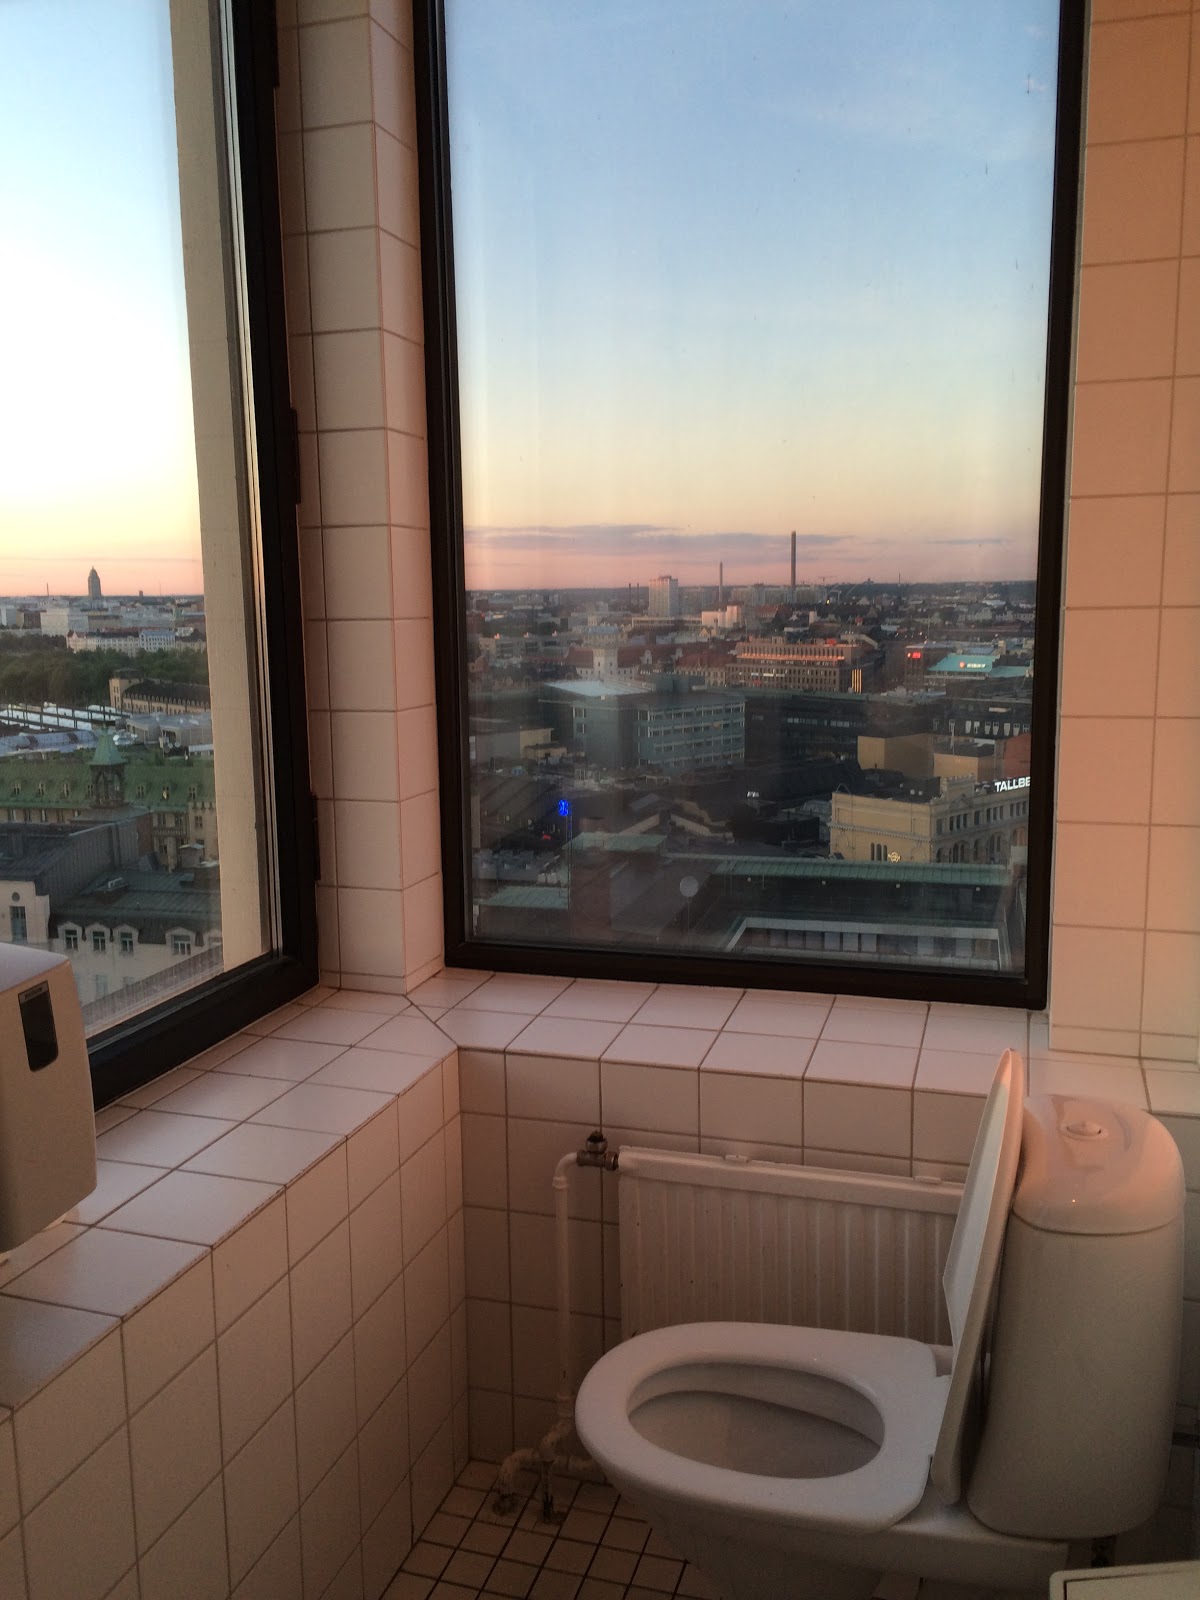 Even the WC has a great view!